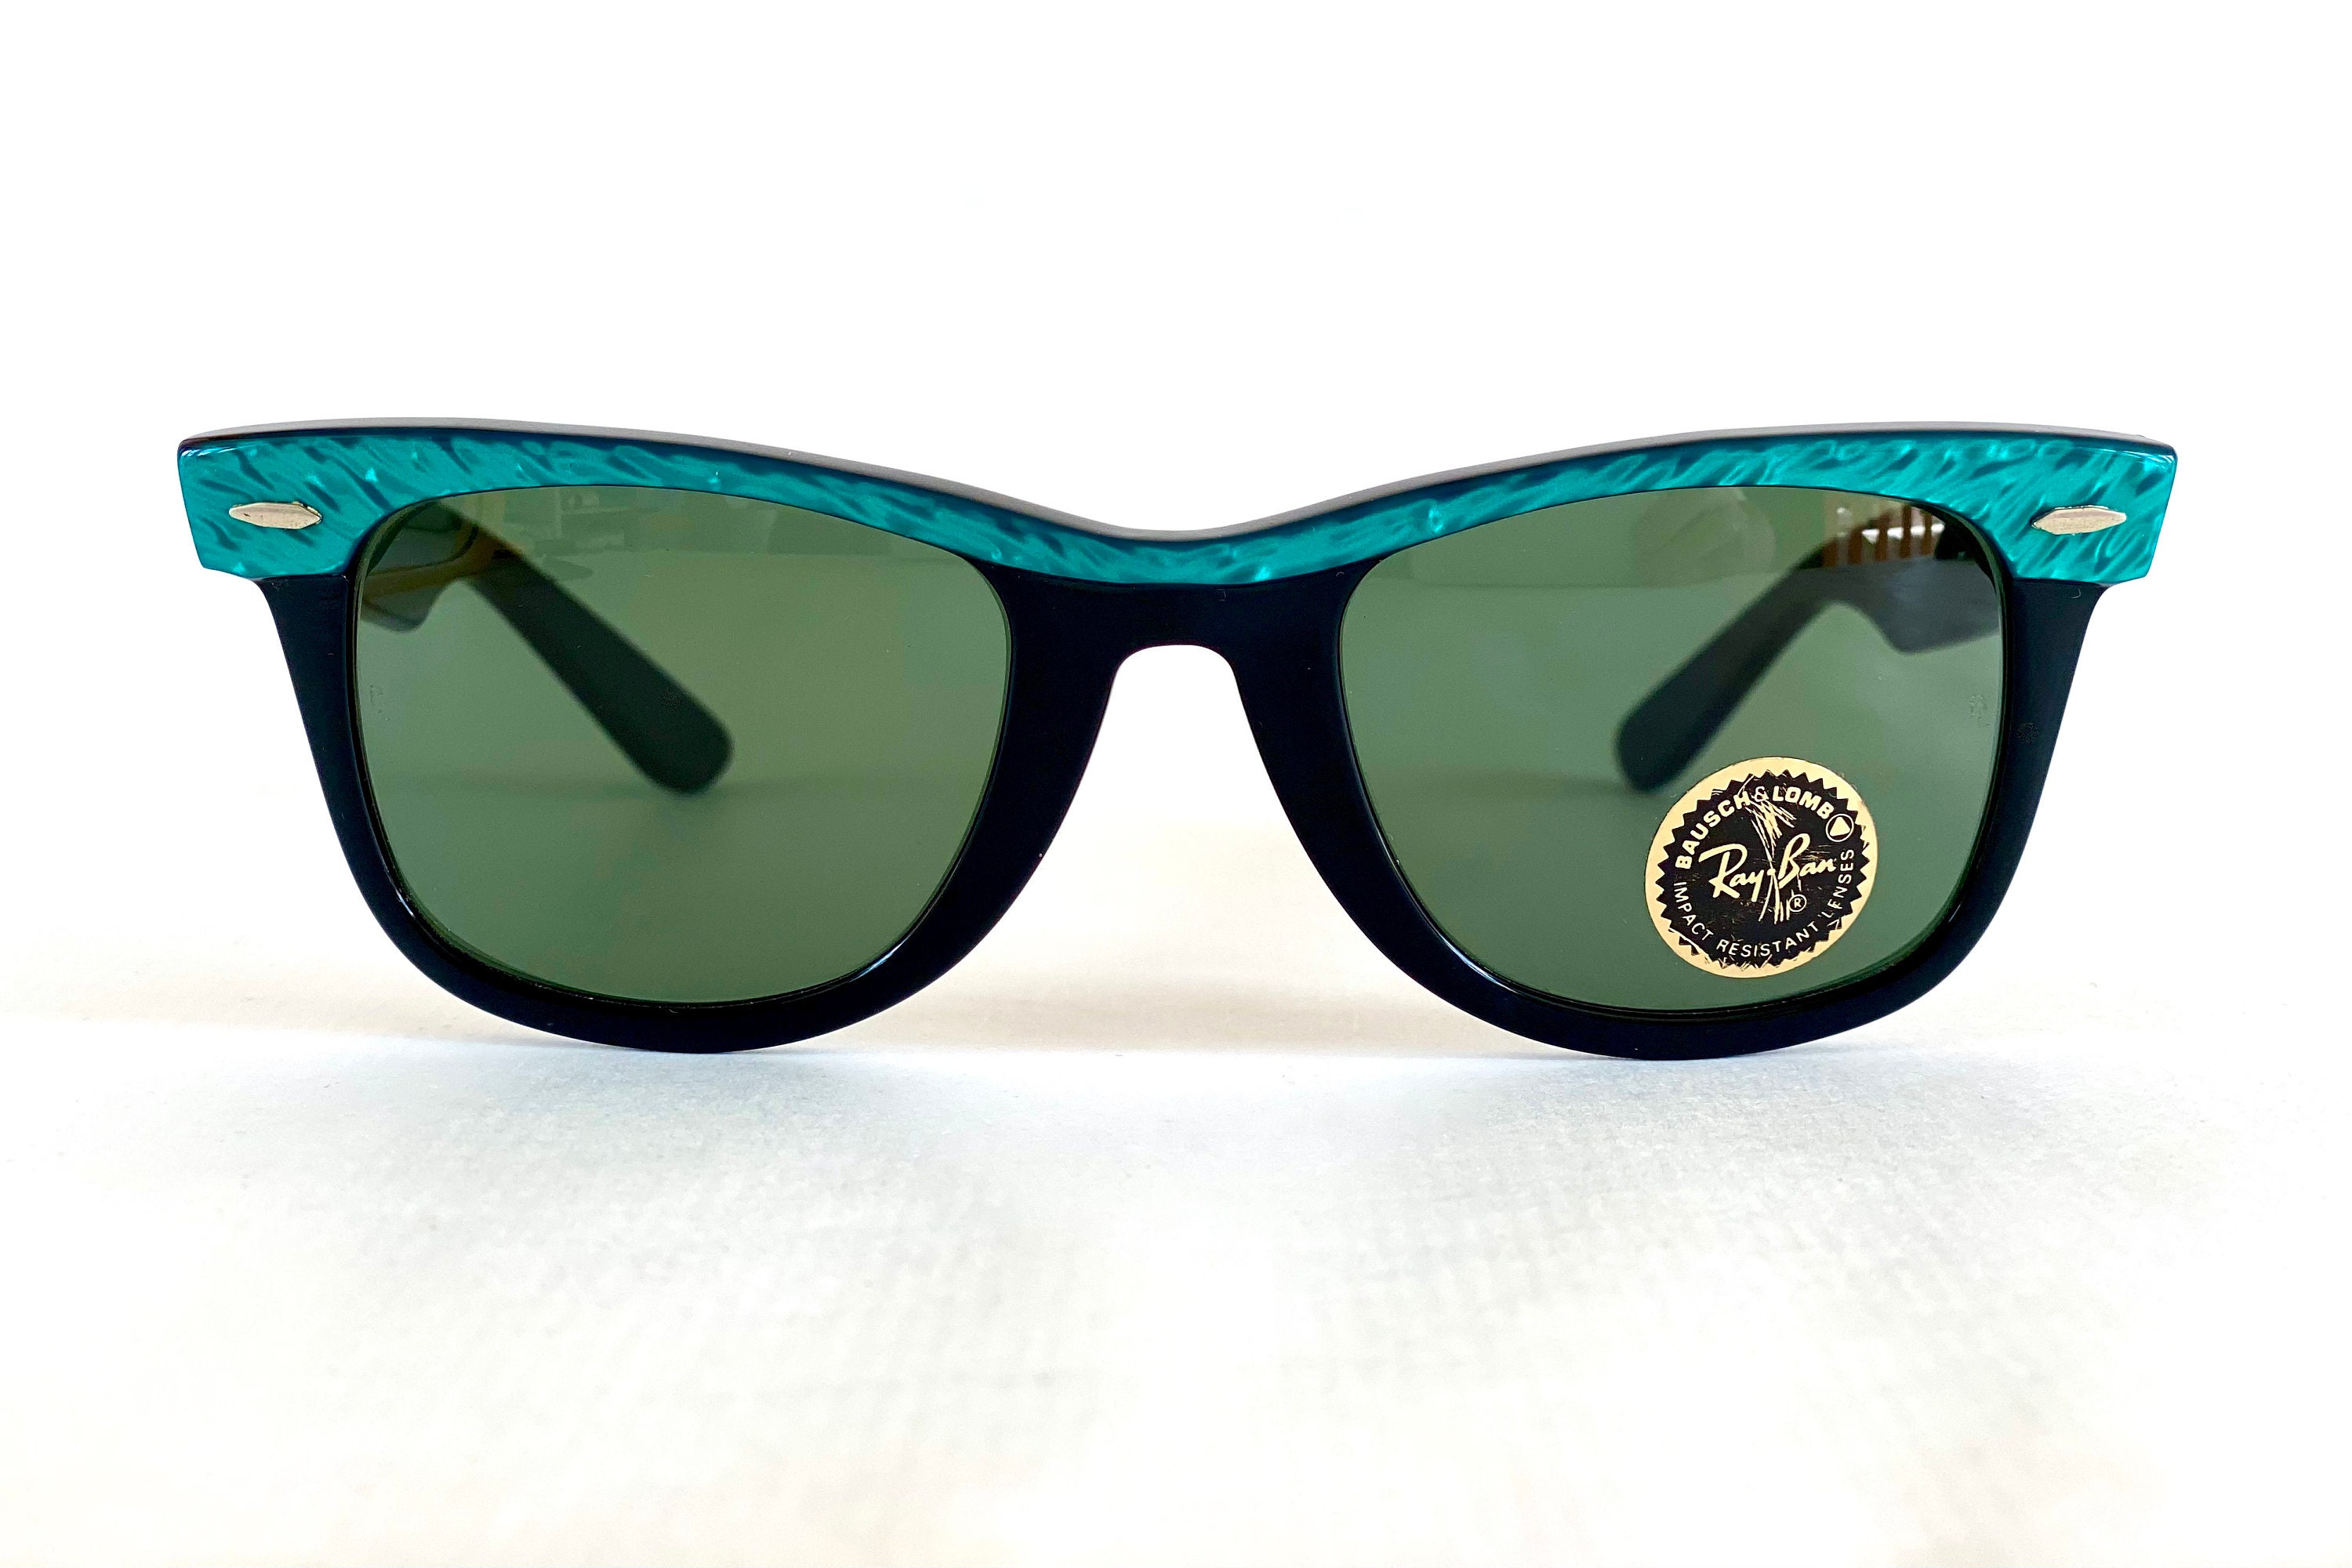 Vintage 1980s Ray-Ban by Bausch & Lomb WAYFARER Turquoise